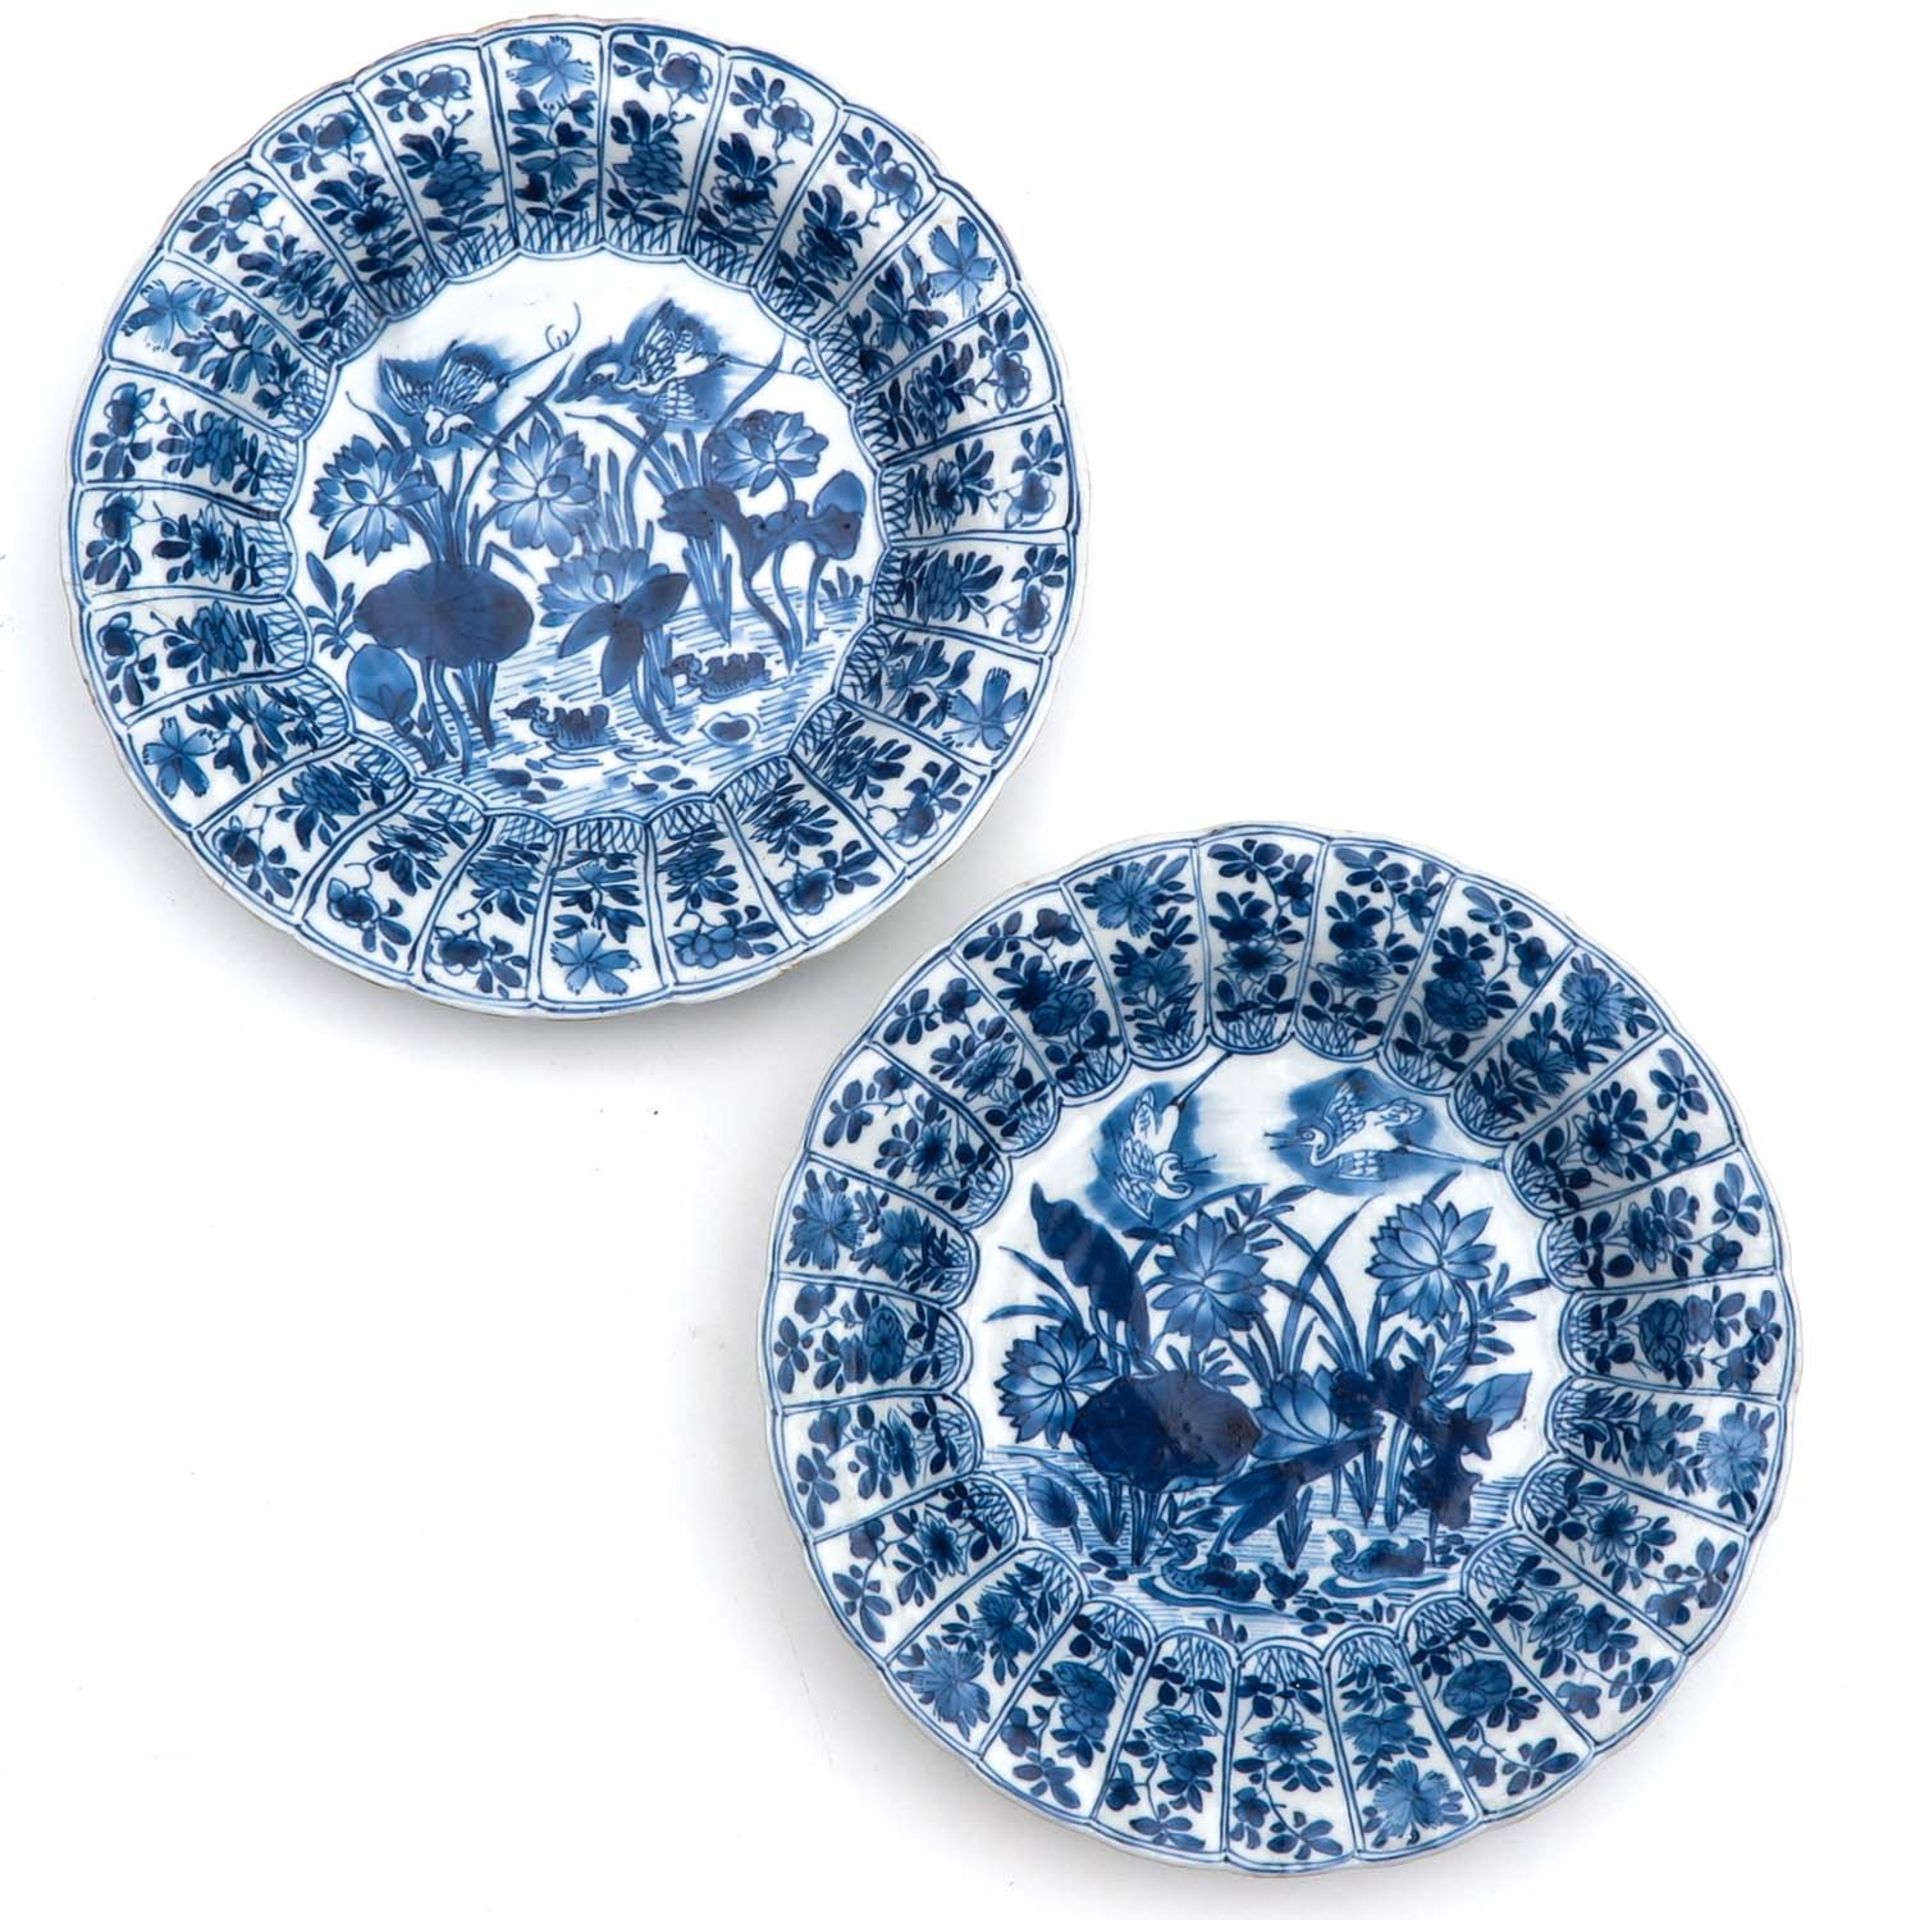 A Series of 4 Blue and White Plates - Image 3 of 9